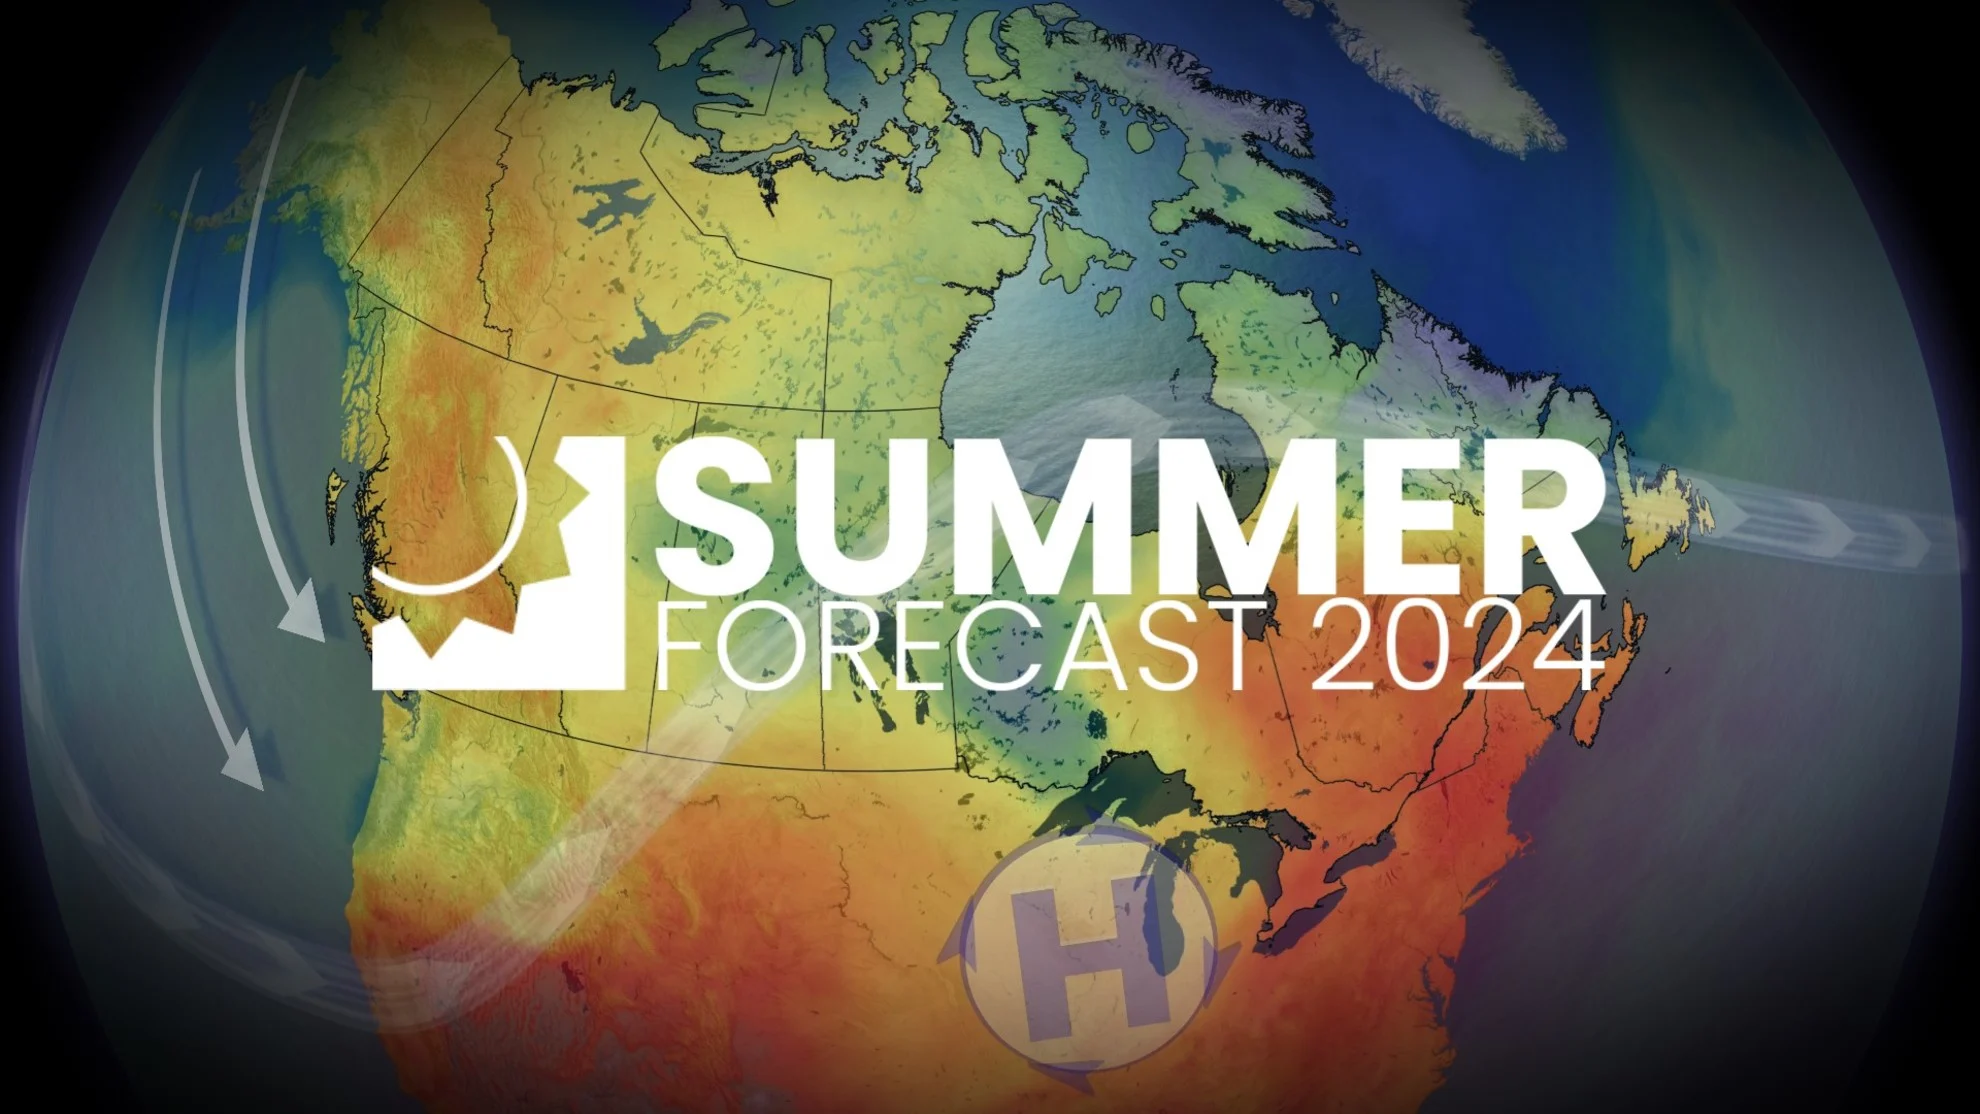 El Niño was the key to our winter (or lack thereof) during the past year, but the global pattern is in a state of upheaval once again. See what this means for Alberta's summer, here